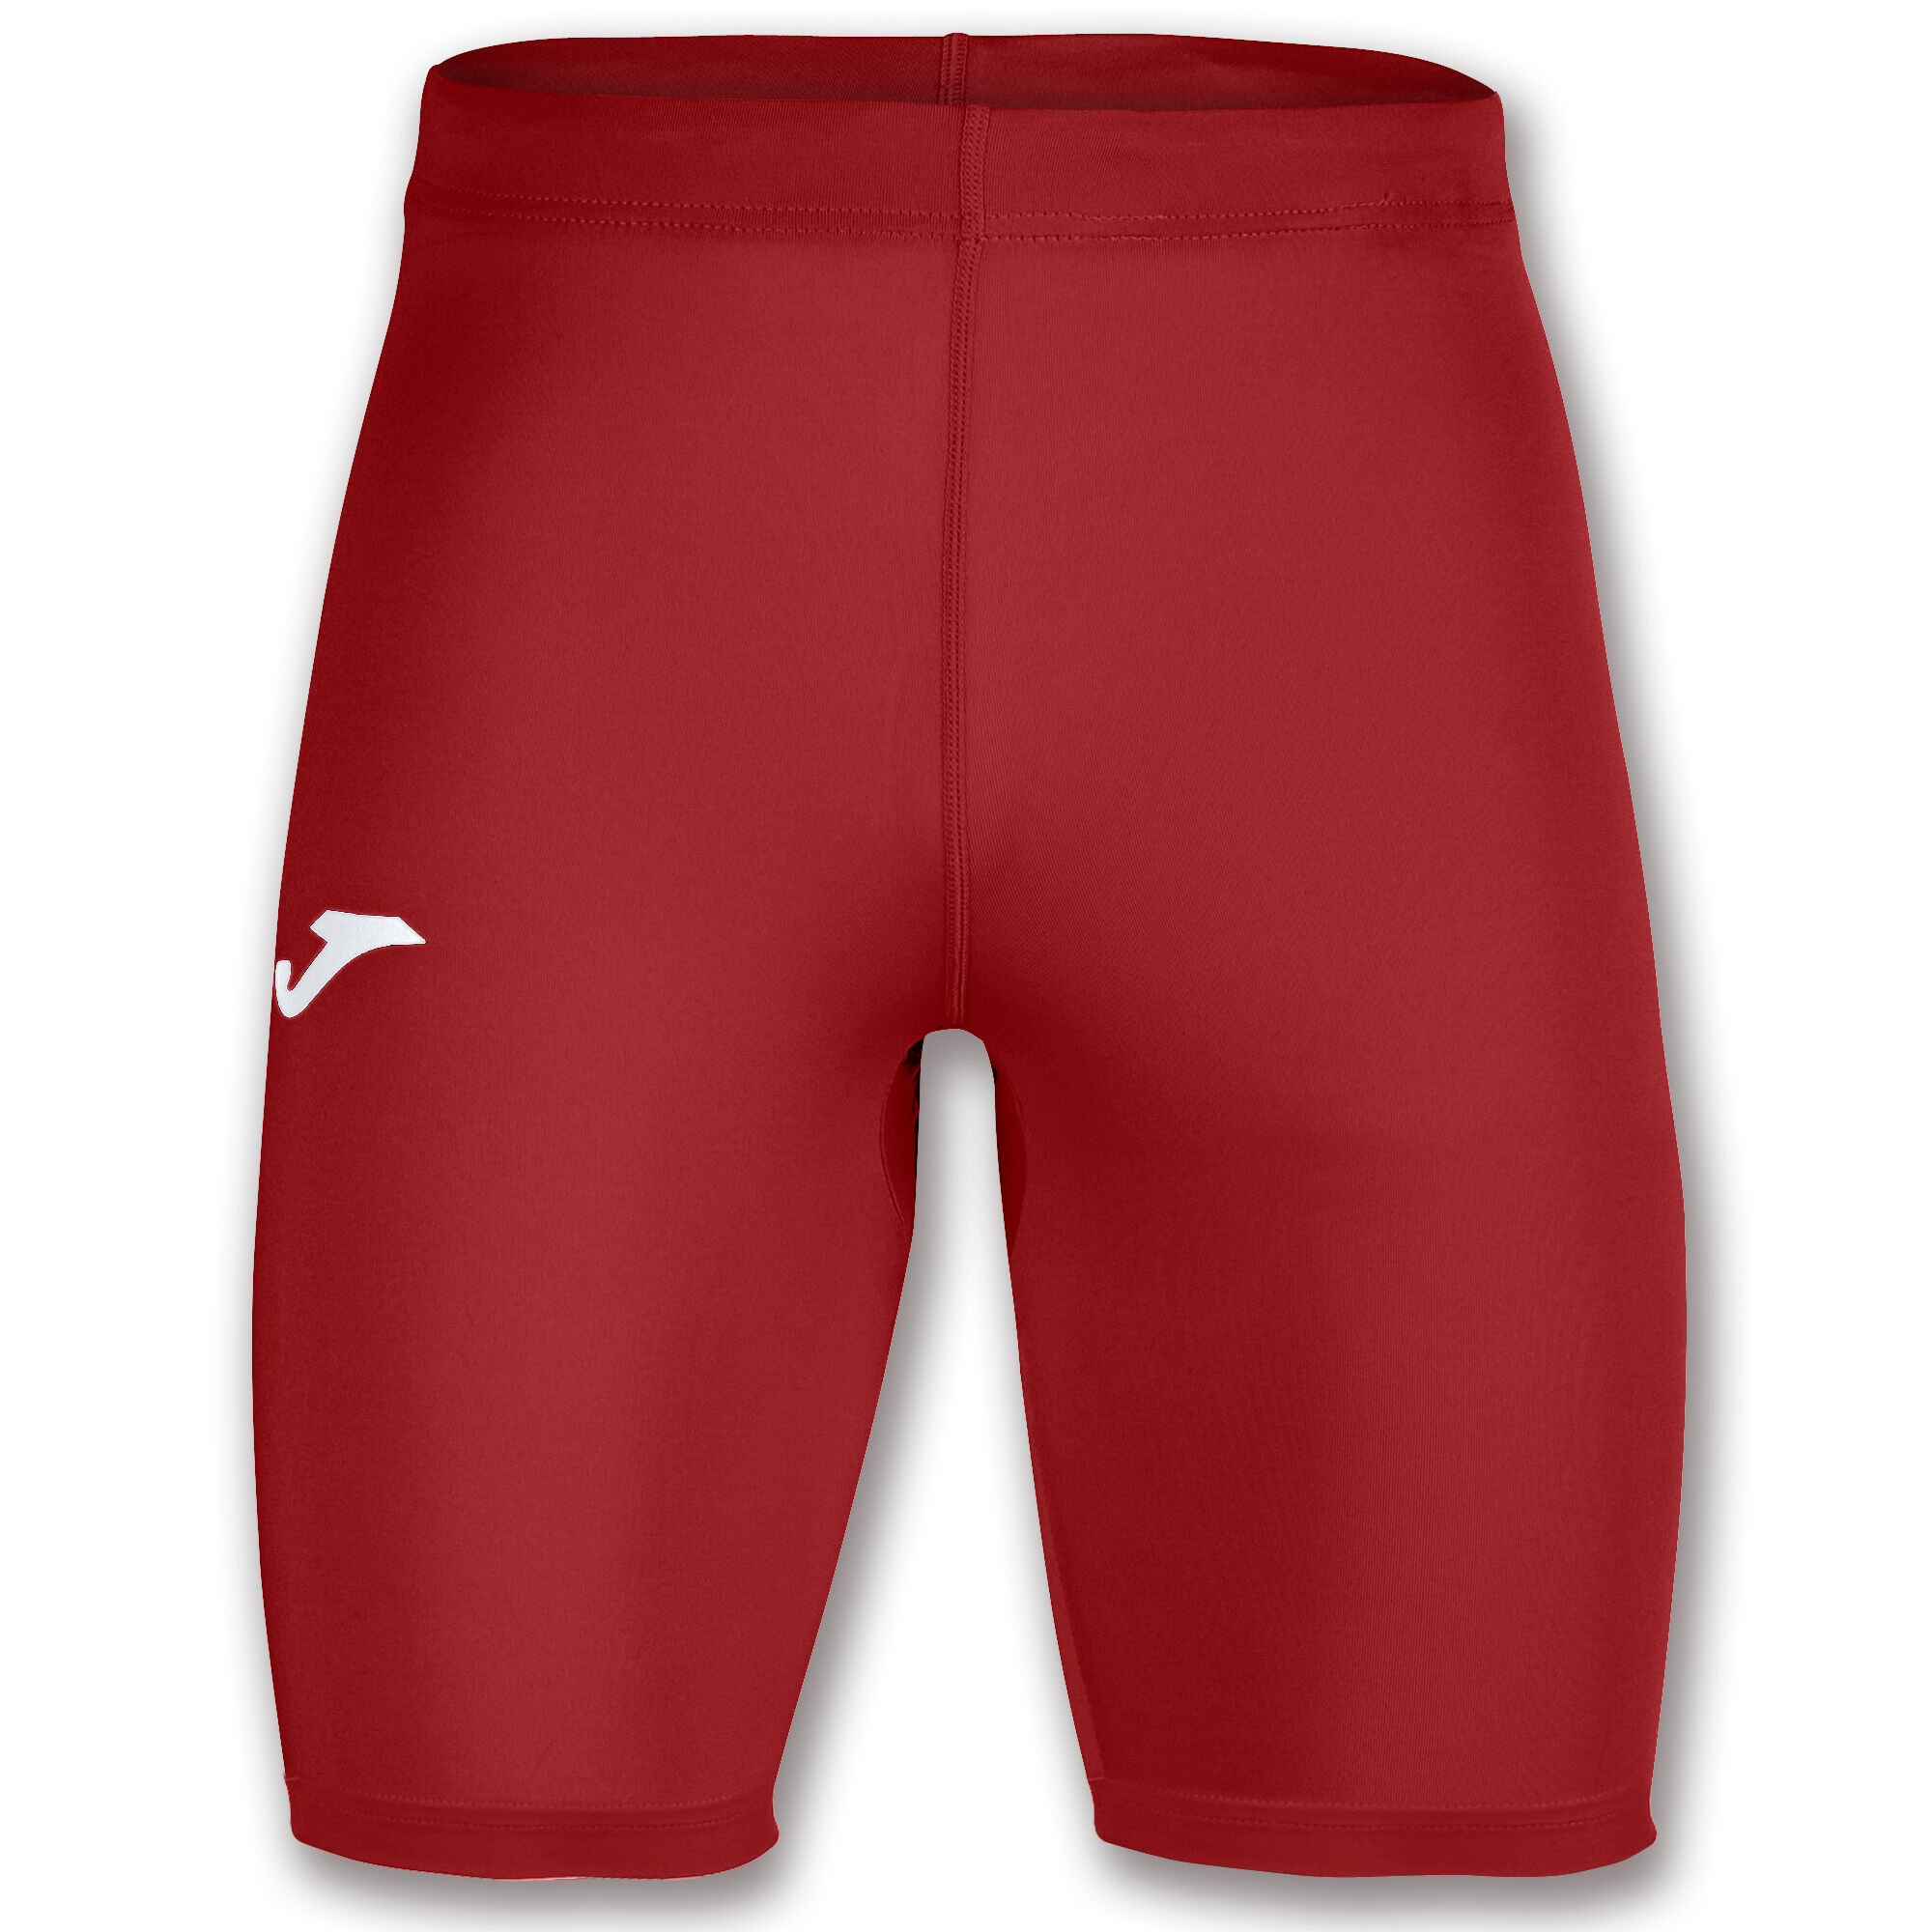 CUISSARD HOMME BRAMA ACADEMY ROUGE